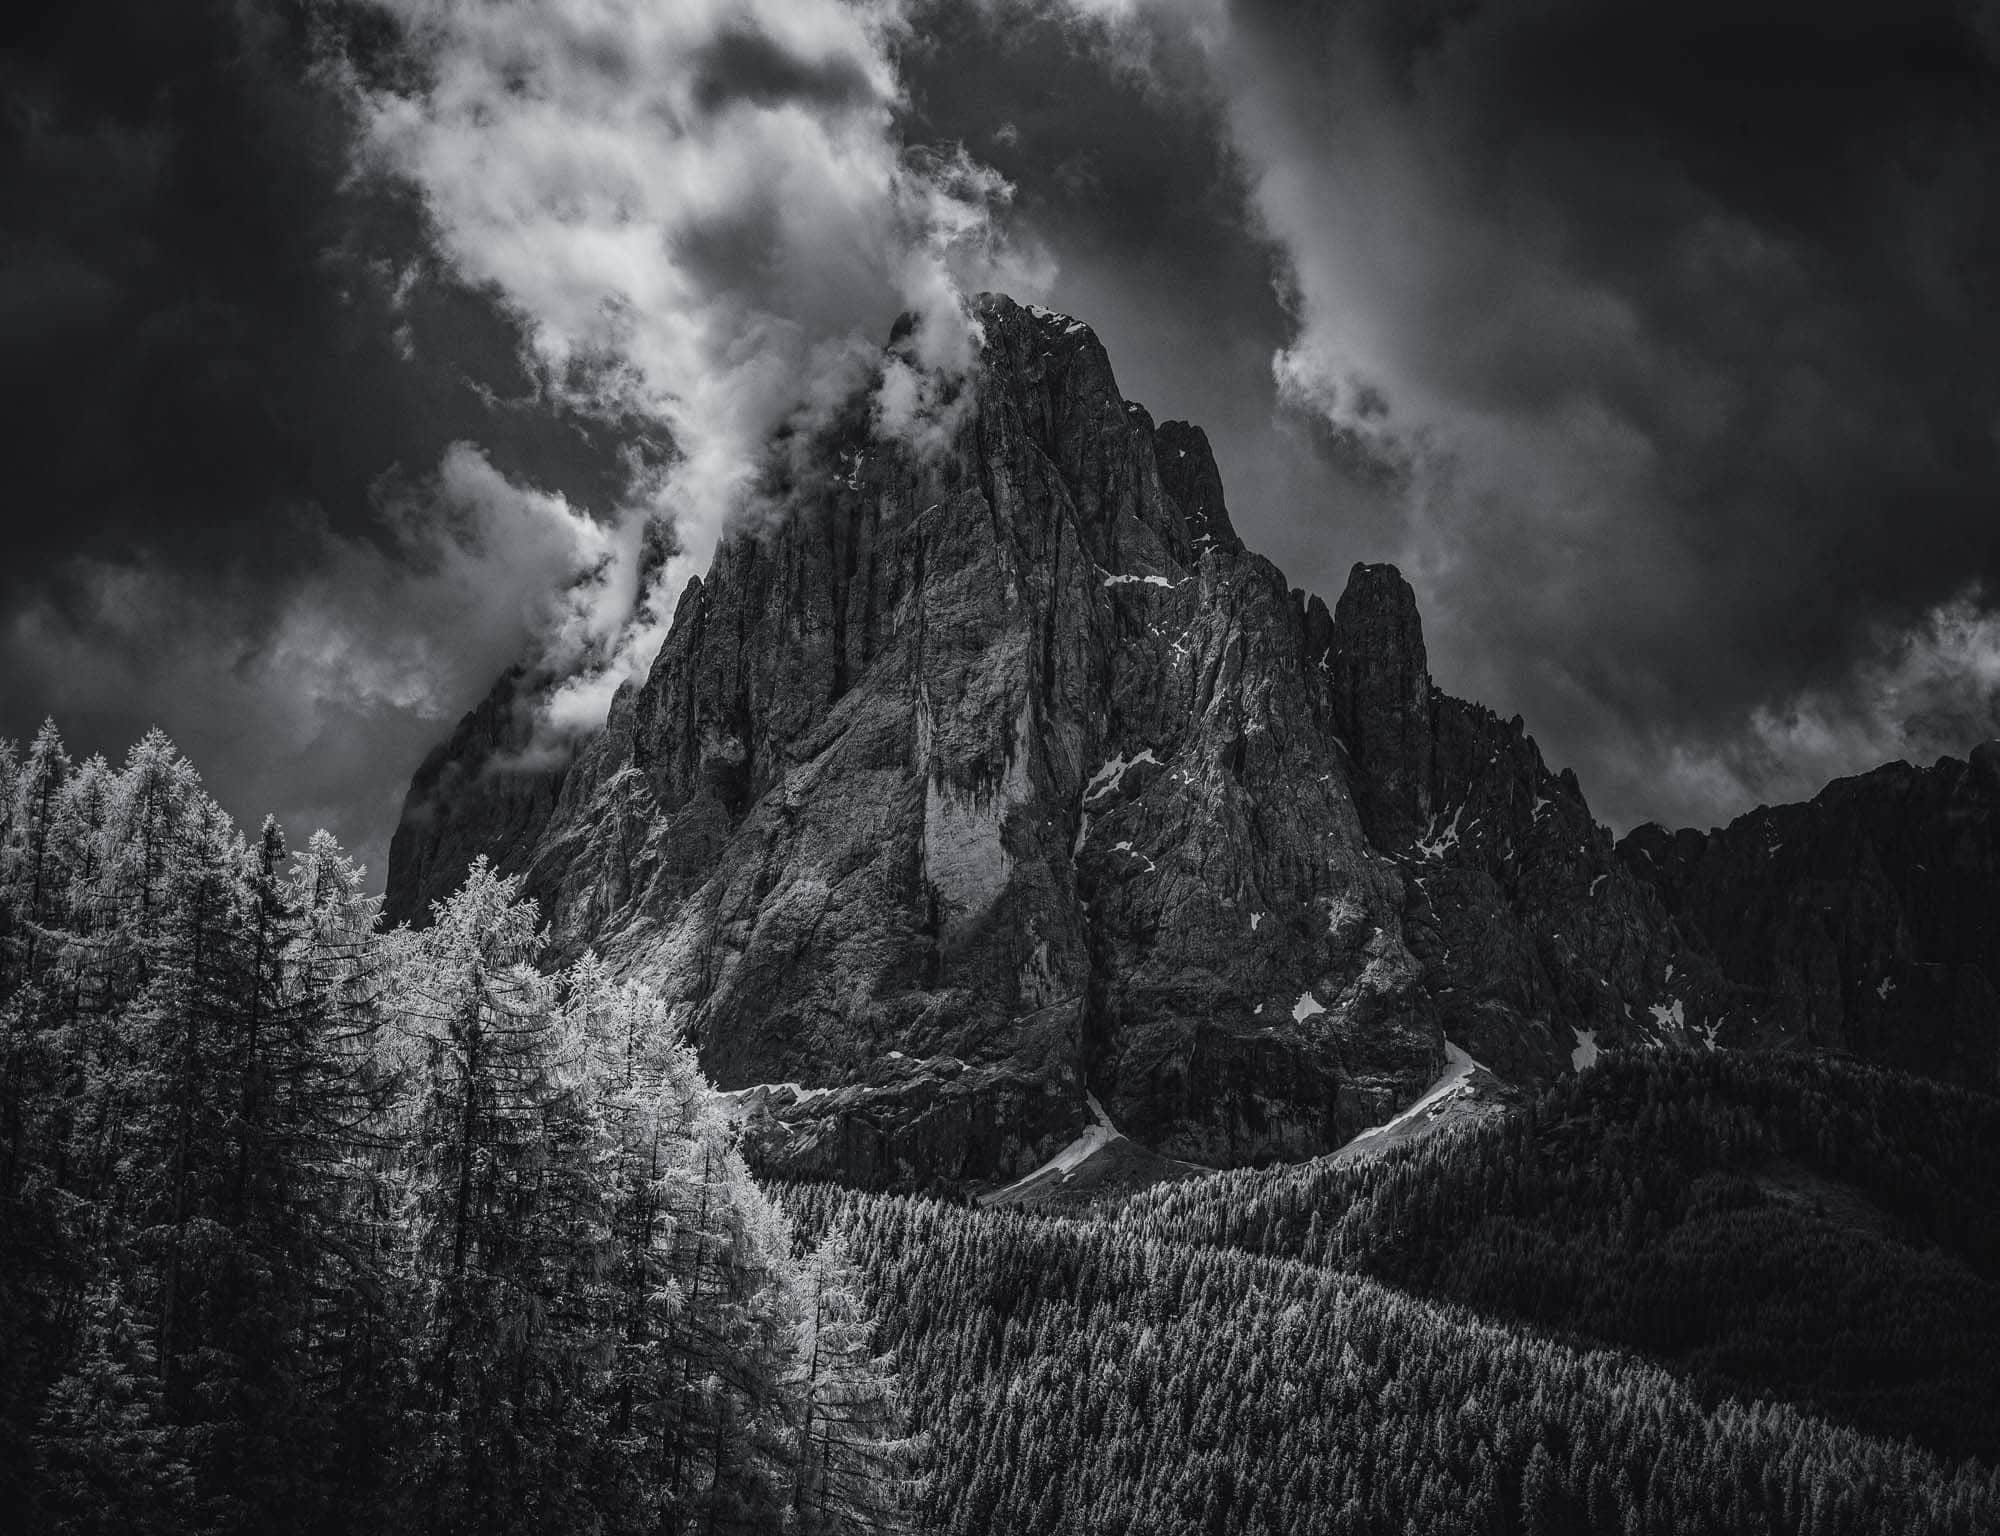 Infrared black and white image of the Dolomites' rugged peaks and glowing forest, reminiscent of Ansel Adams' style.